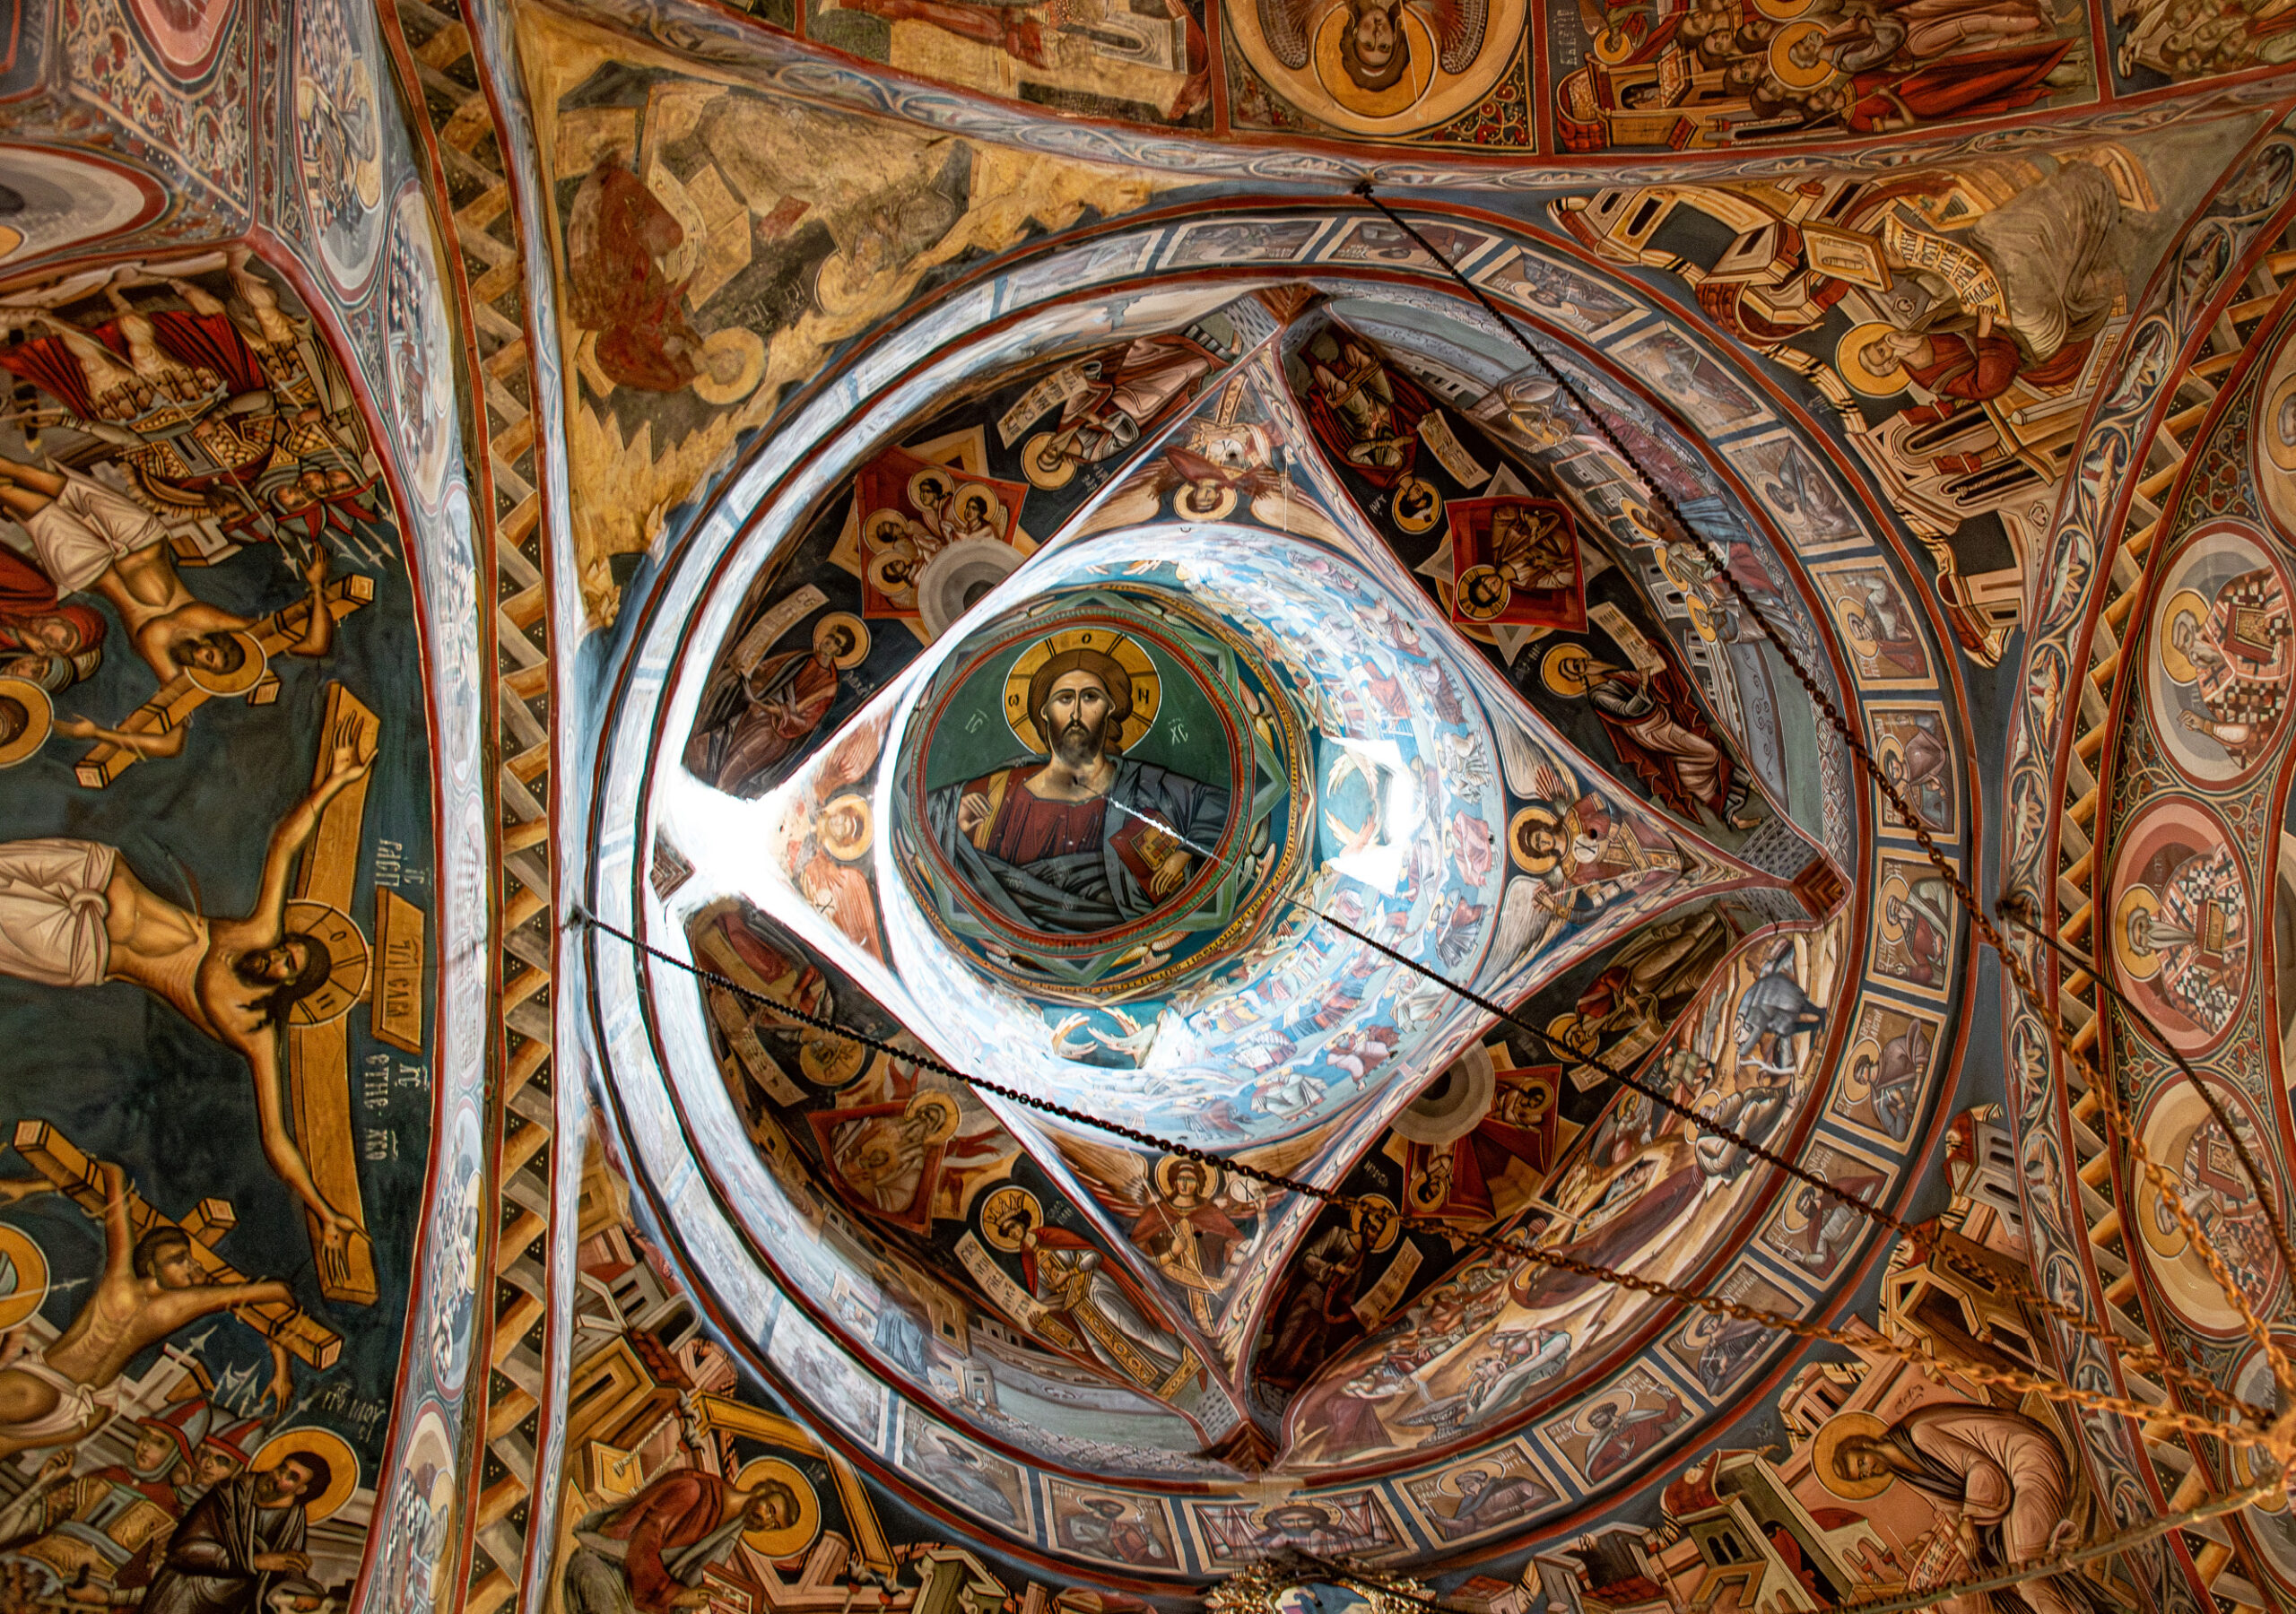 Ceilings as well are covered with murals. Jesus frowns from the recesses of the church’s cupola.